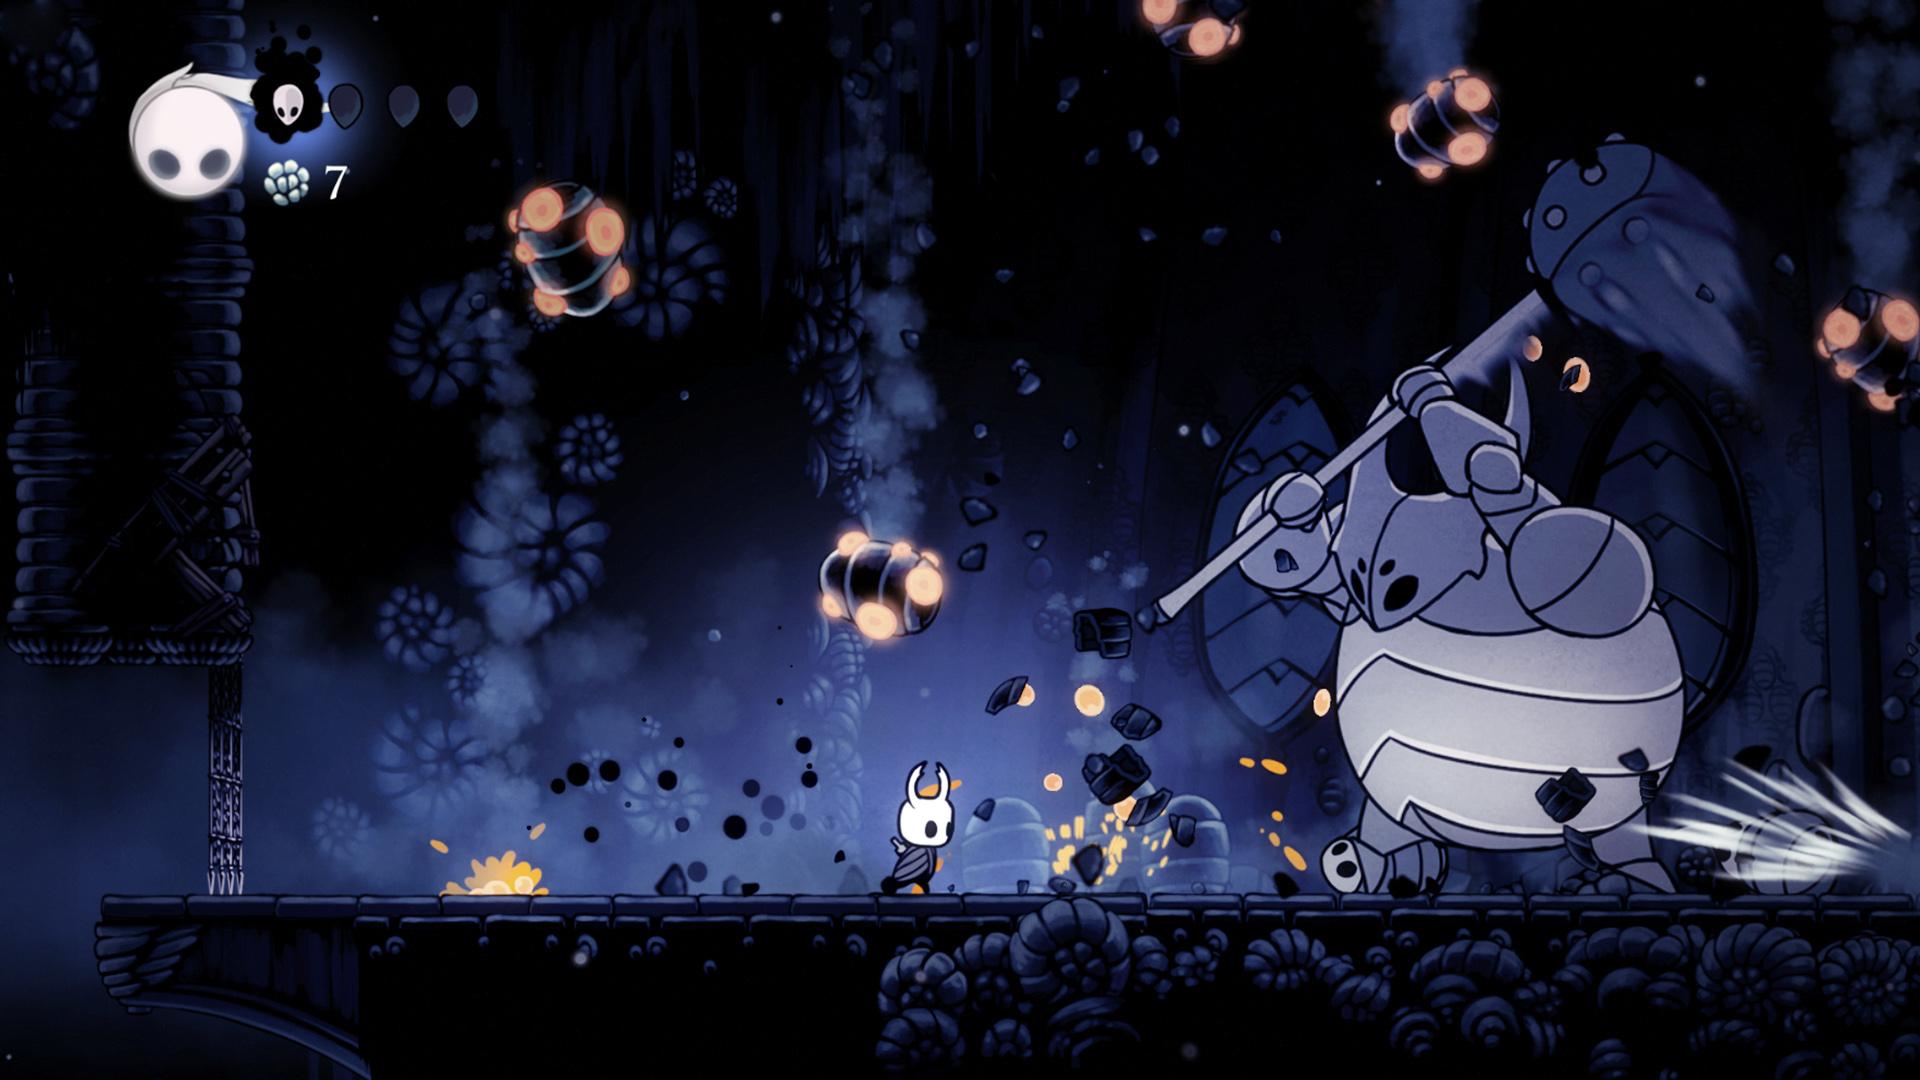 Hollow Knight's last and free DLC pack is out now alongside of a